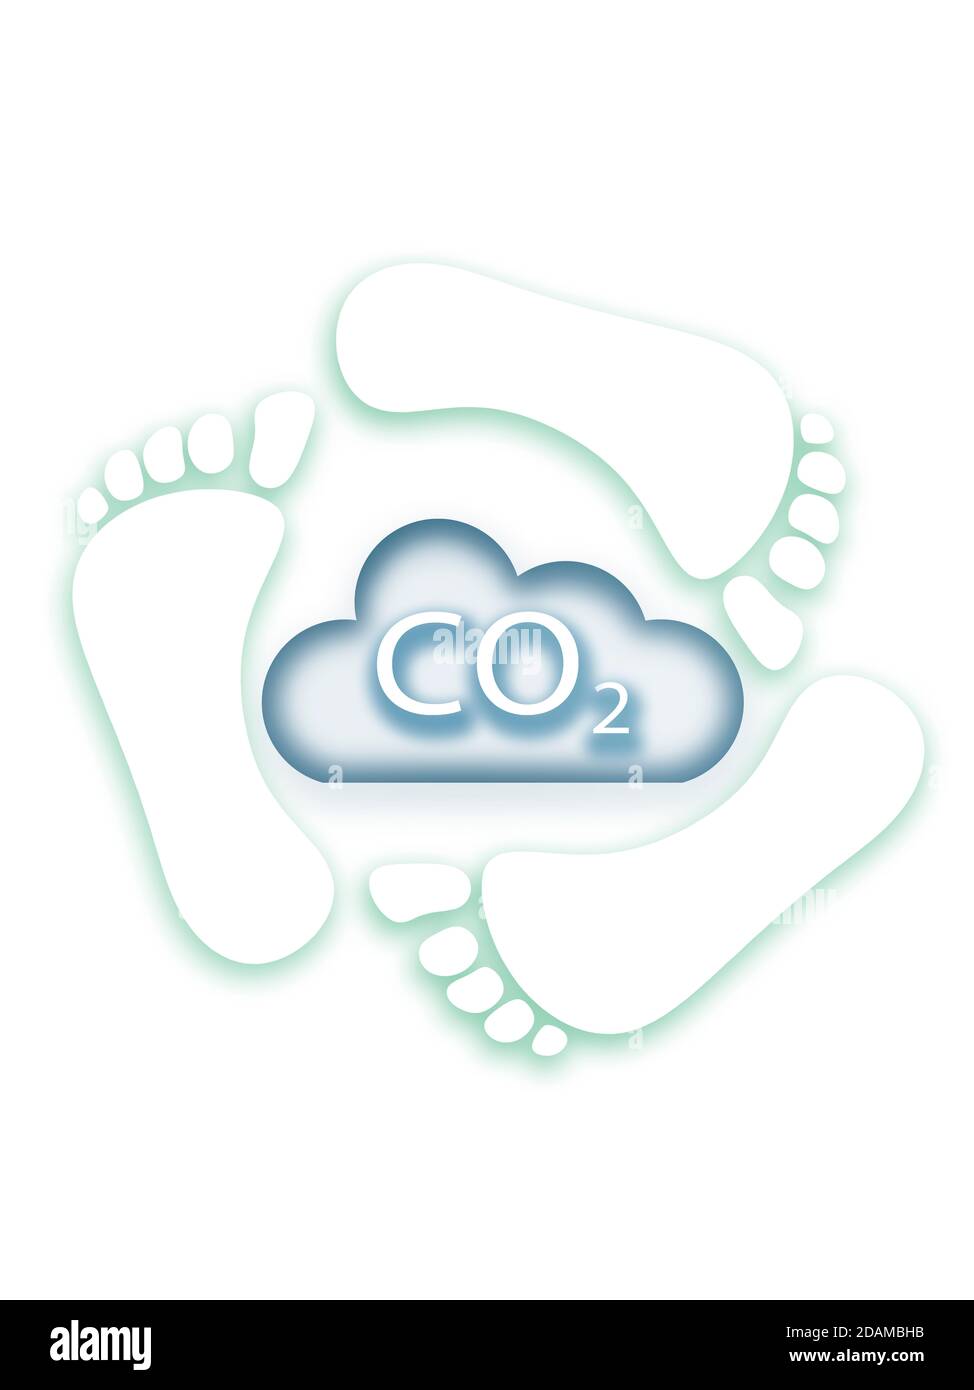 Carbon cloud with footprints, illustration. Stock Photo